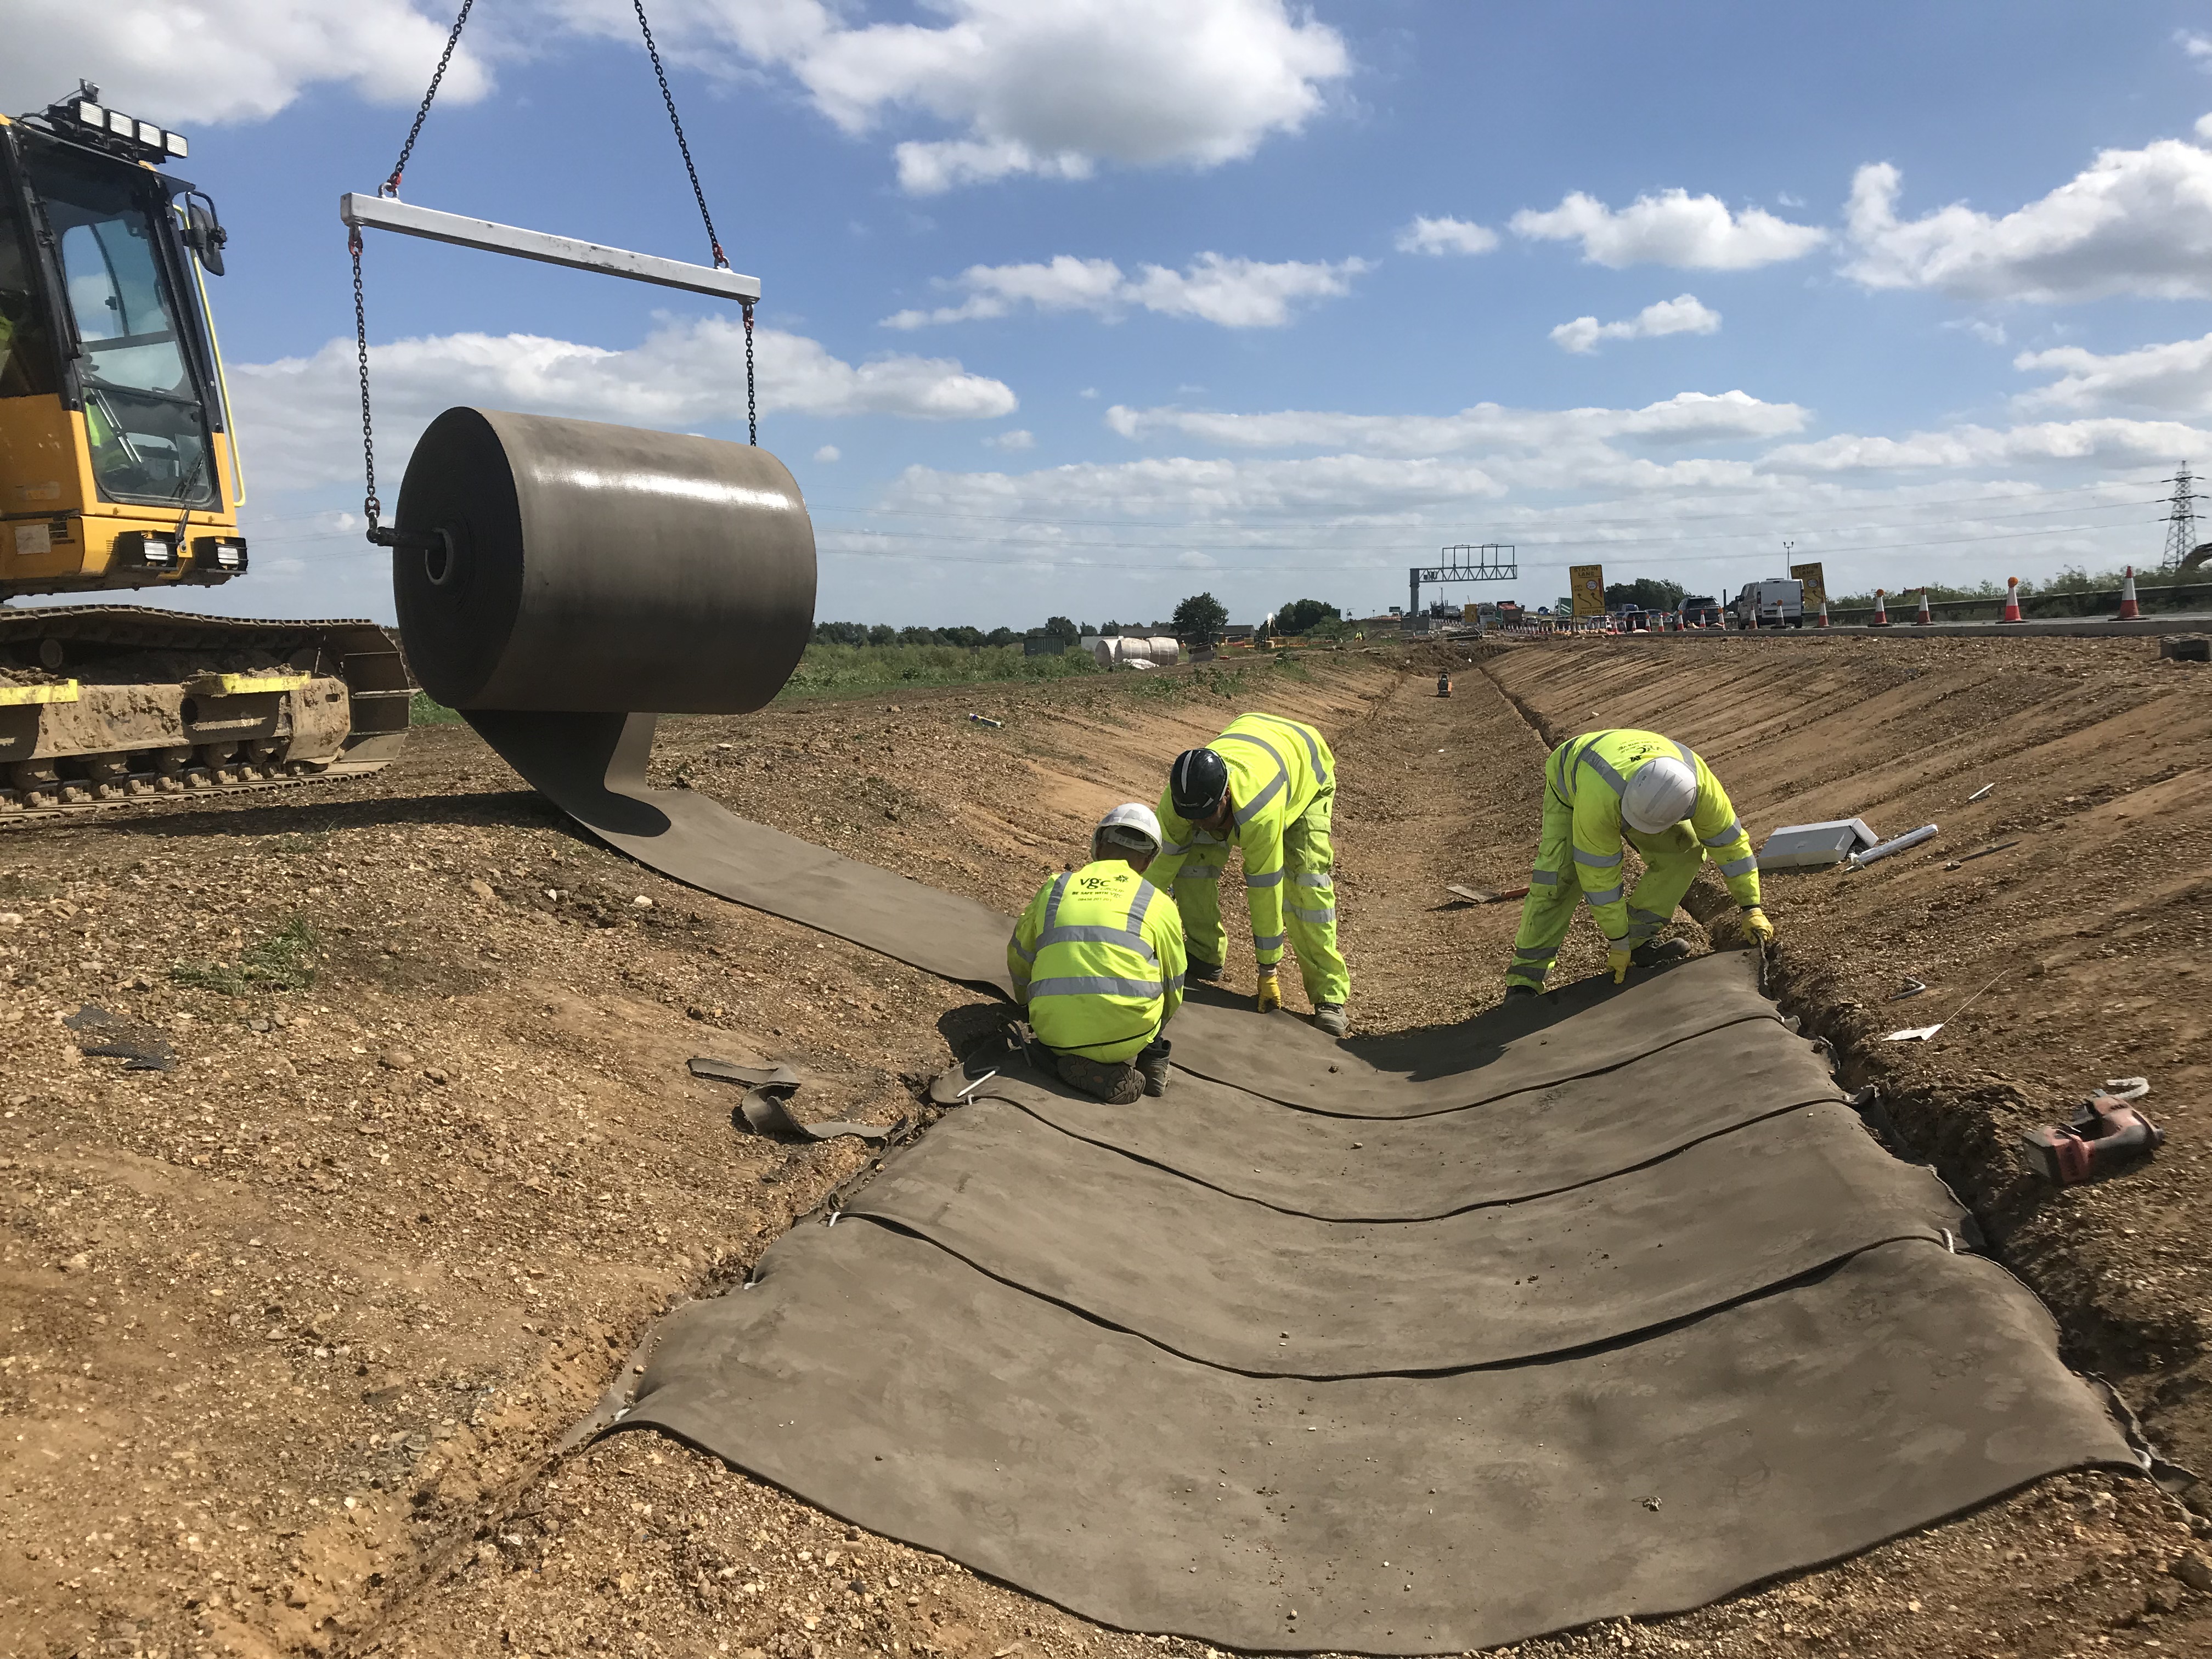 No Need for Mixers – UK Roadsides Receiving Upgrades on a Roll